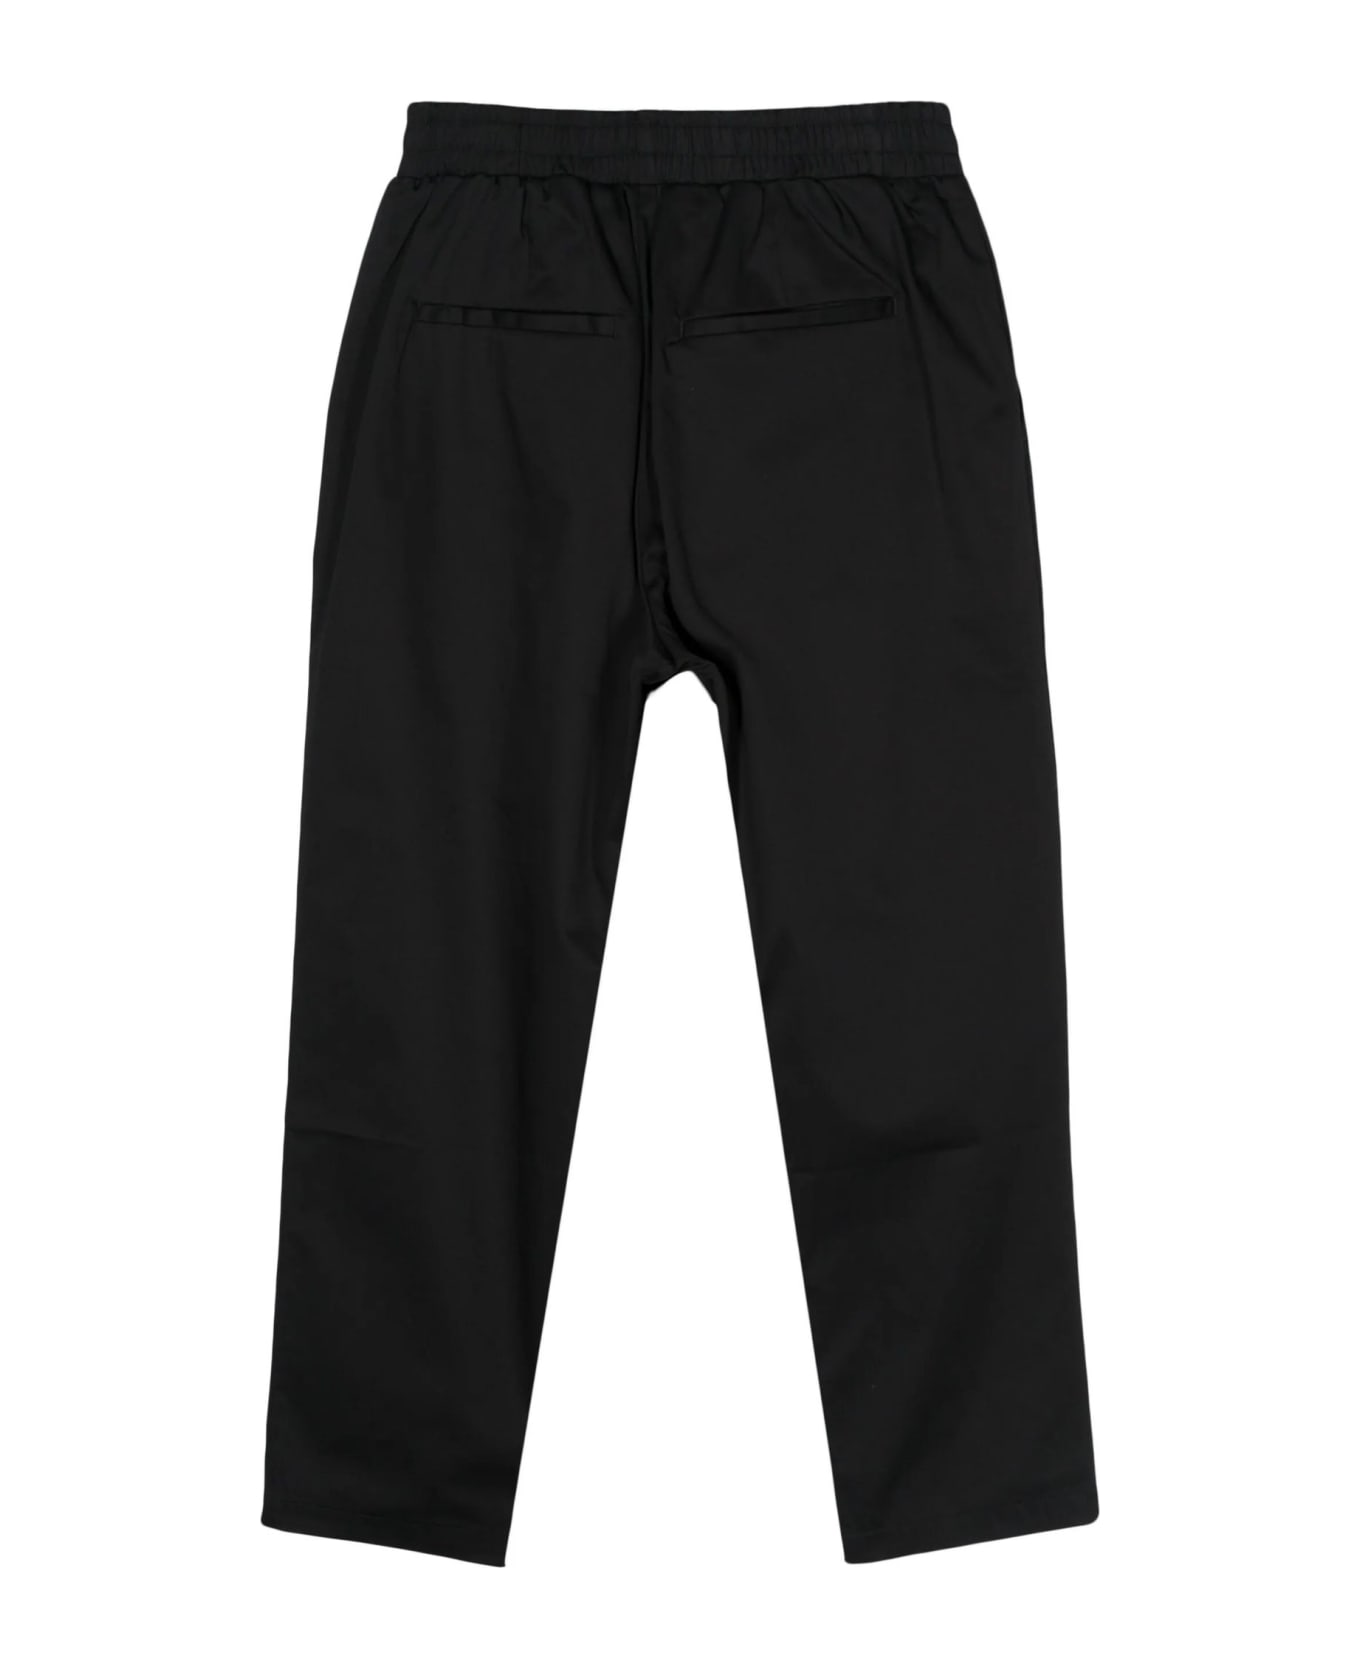 Family First Milano Family First Trousers Black - Black